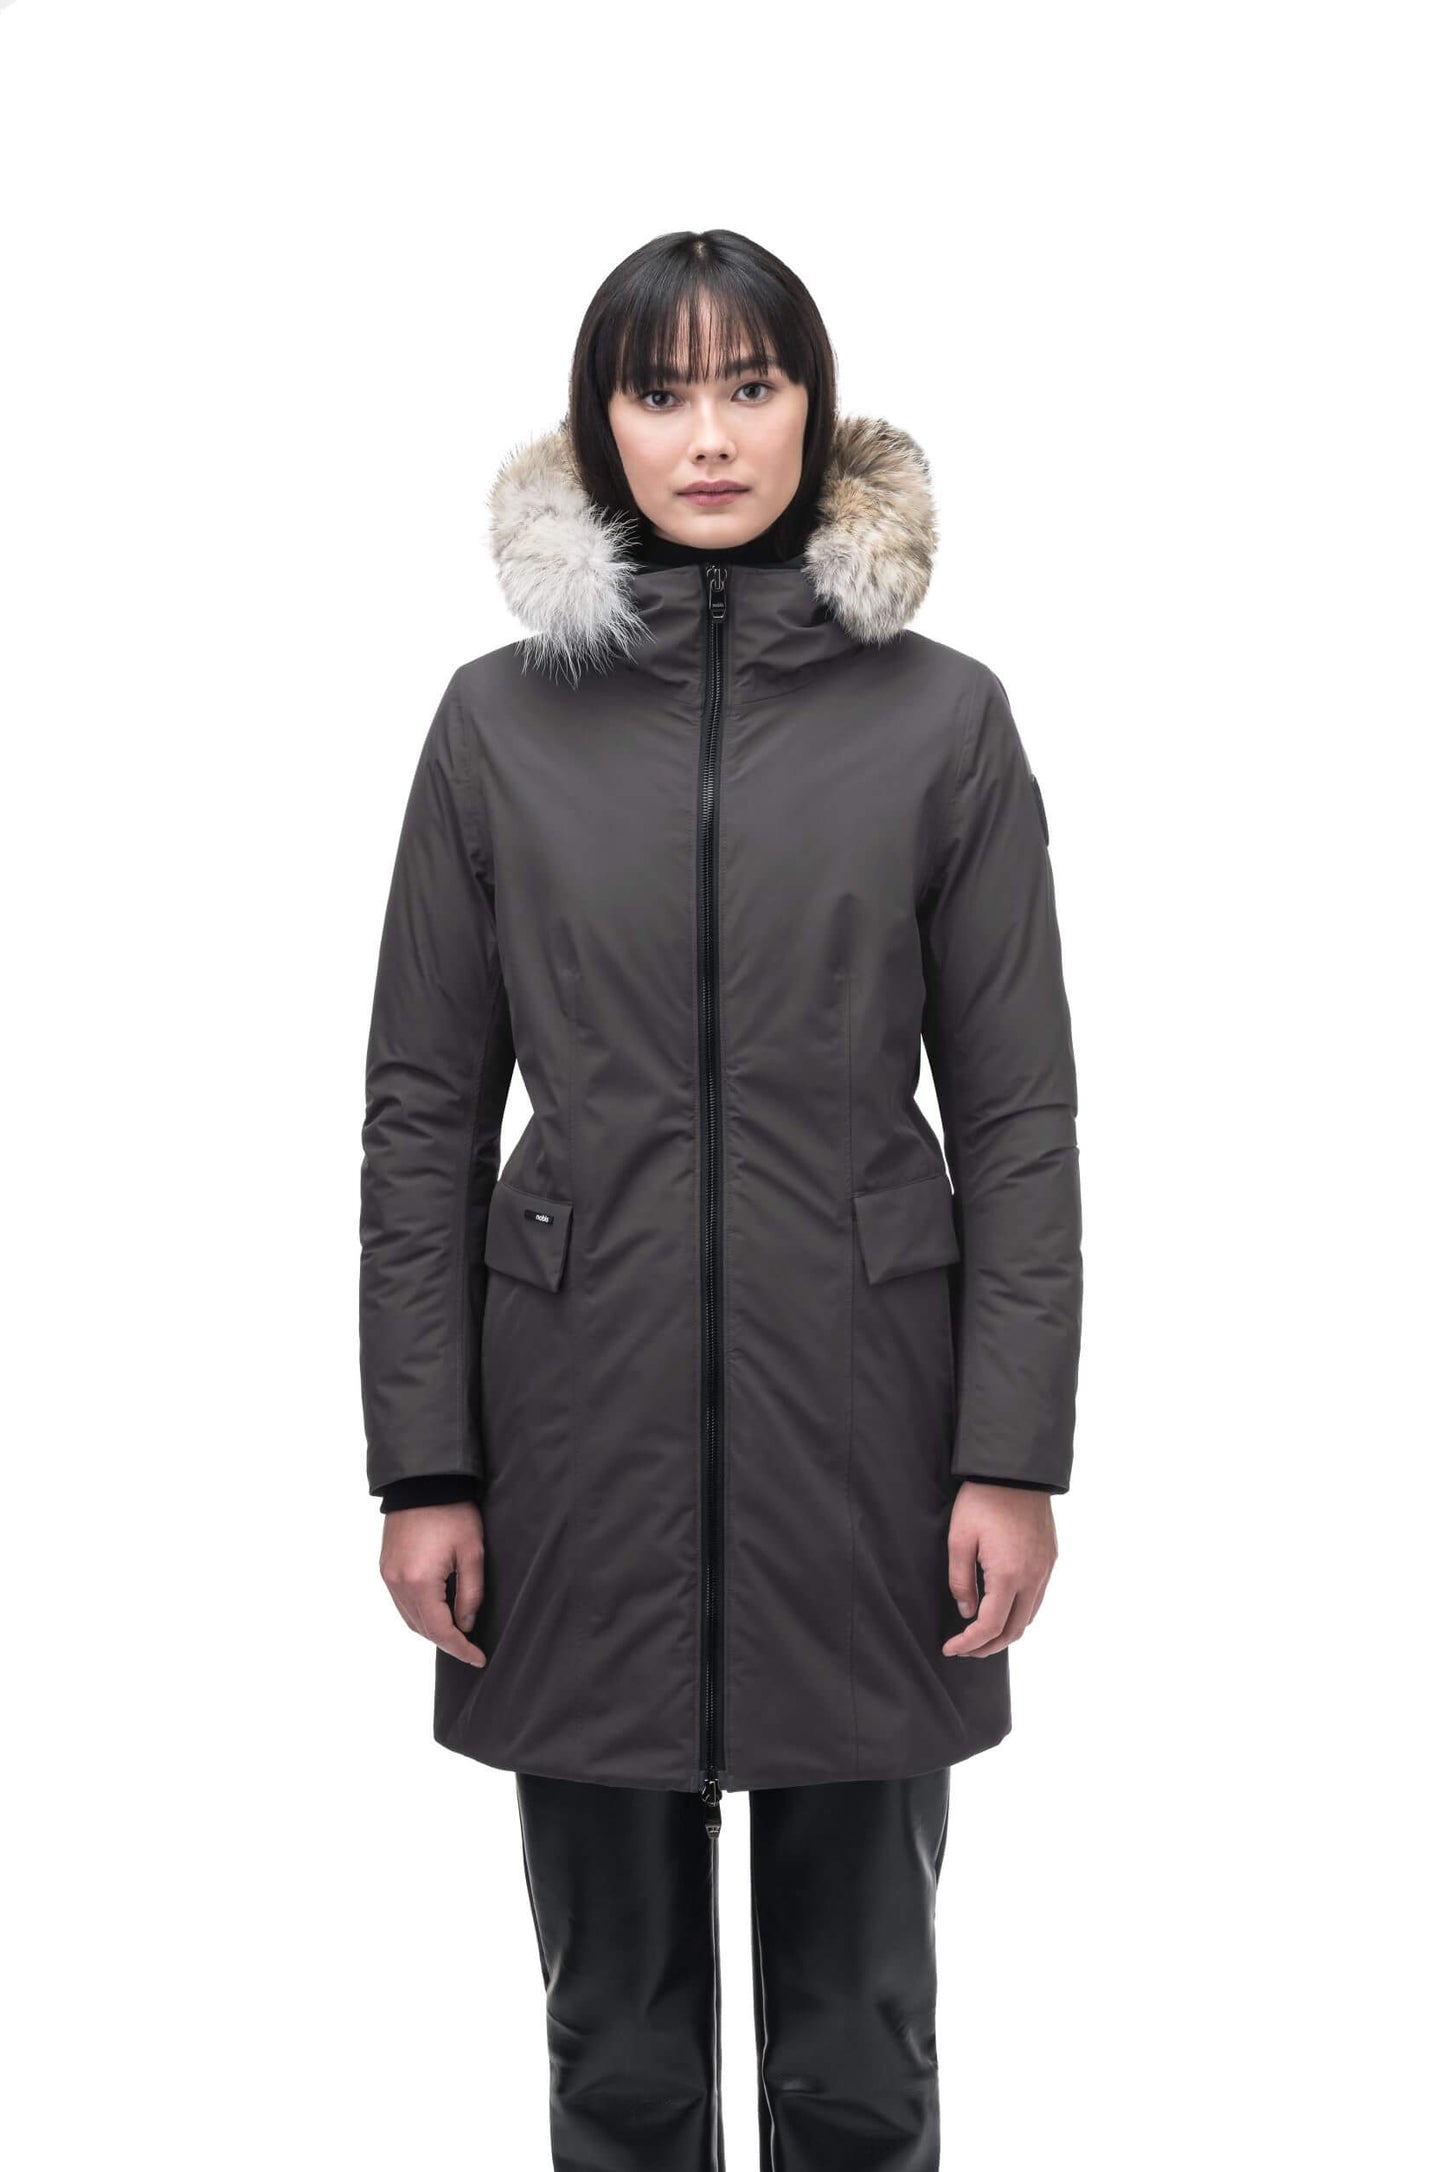 Romeda Ladies Mid Thigh Parka in thigh length, Canadian duck down insulation, non-removable hood with removable fur ruff trim, and two-way front zipper, in Steel Grey